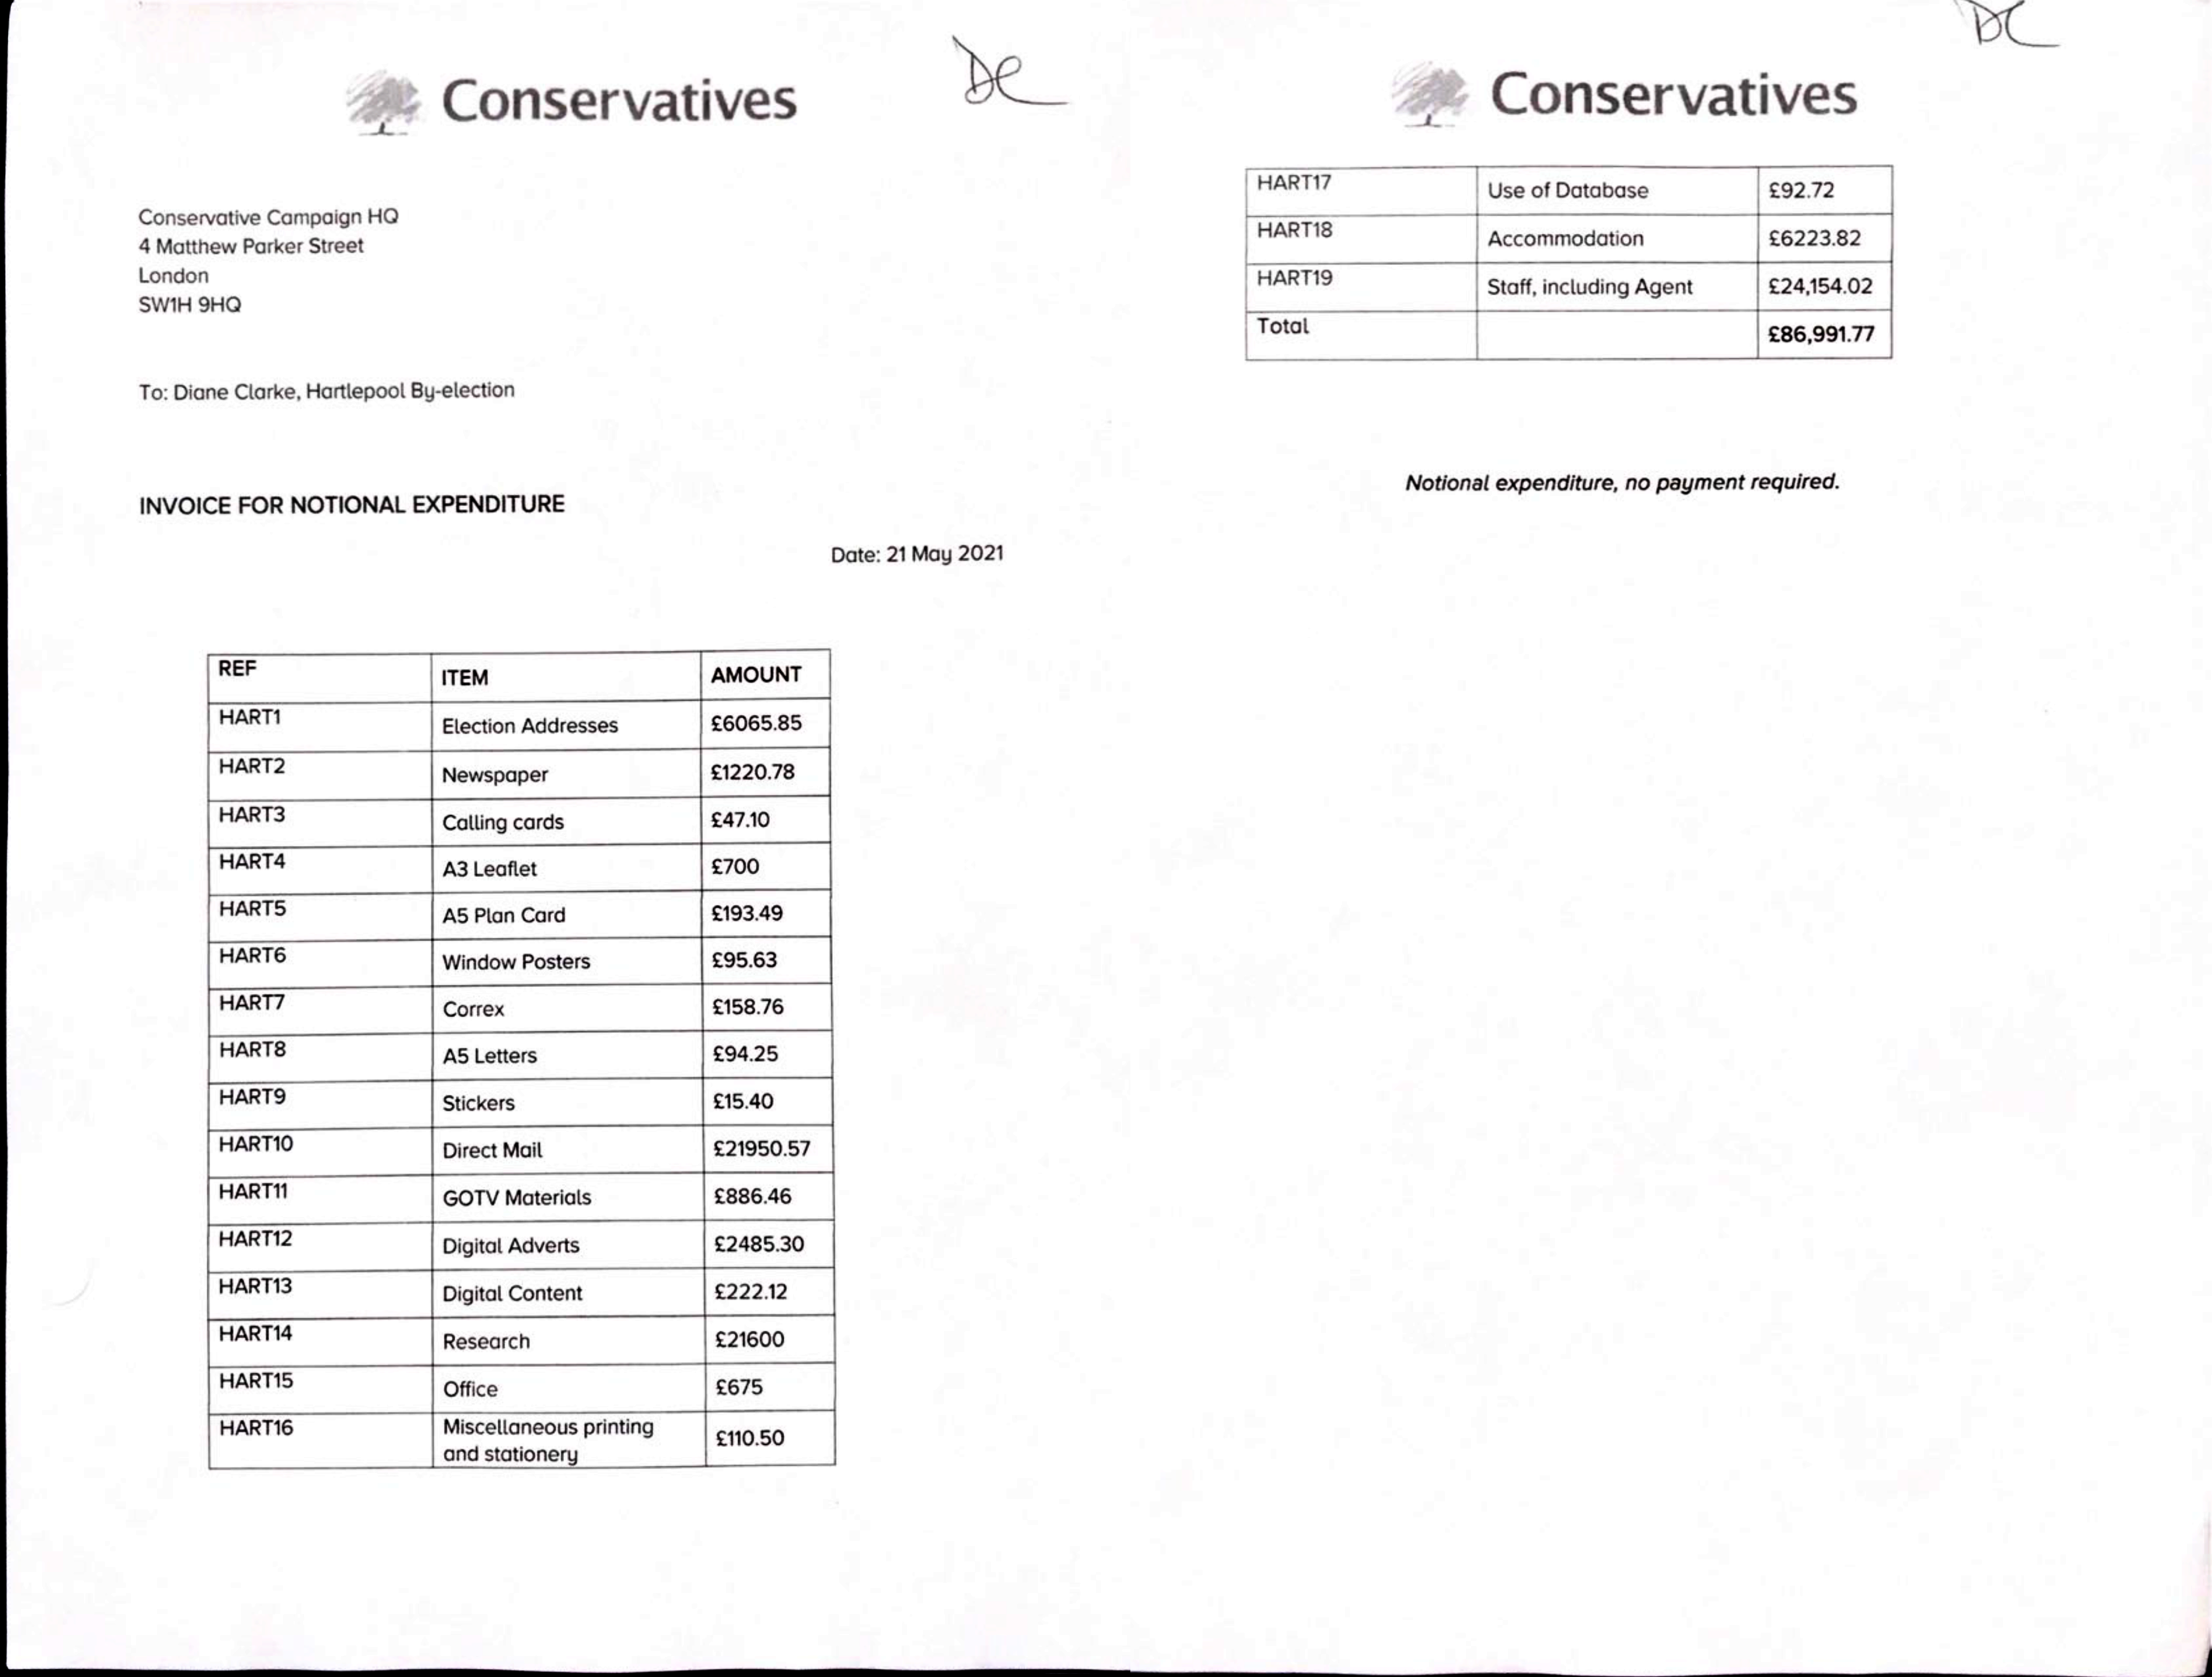 An invoice produced by the Conservative Party showing a list of notional expenditure